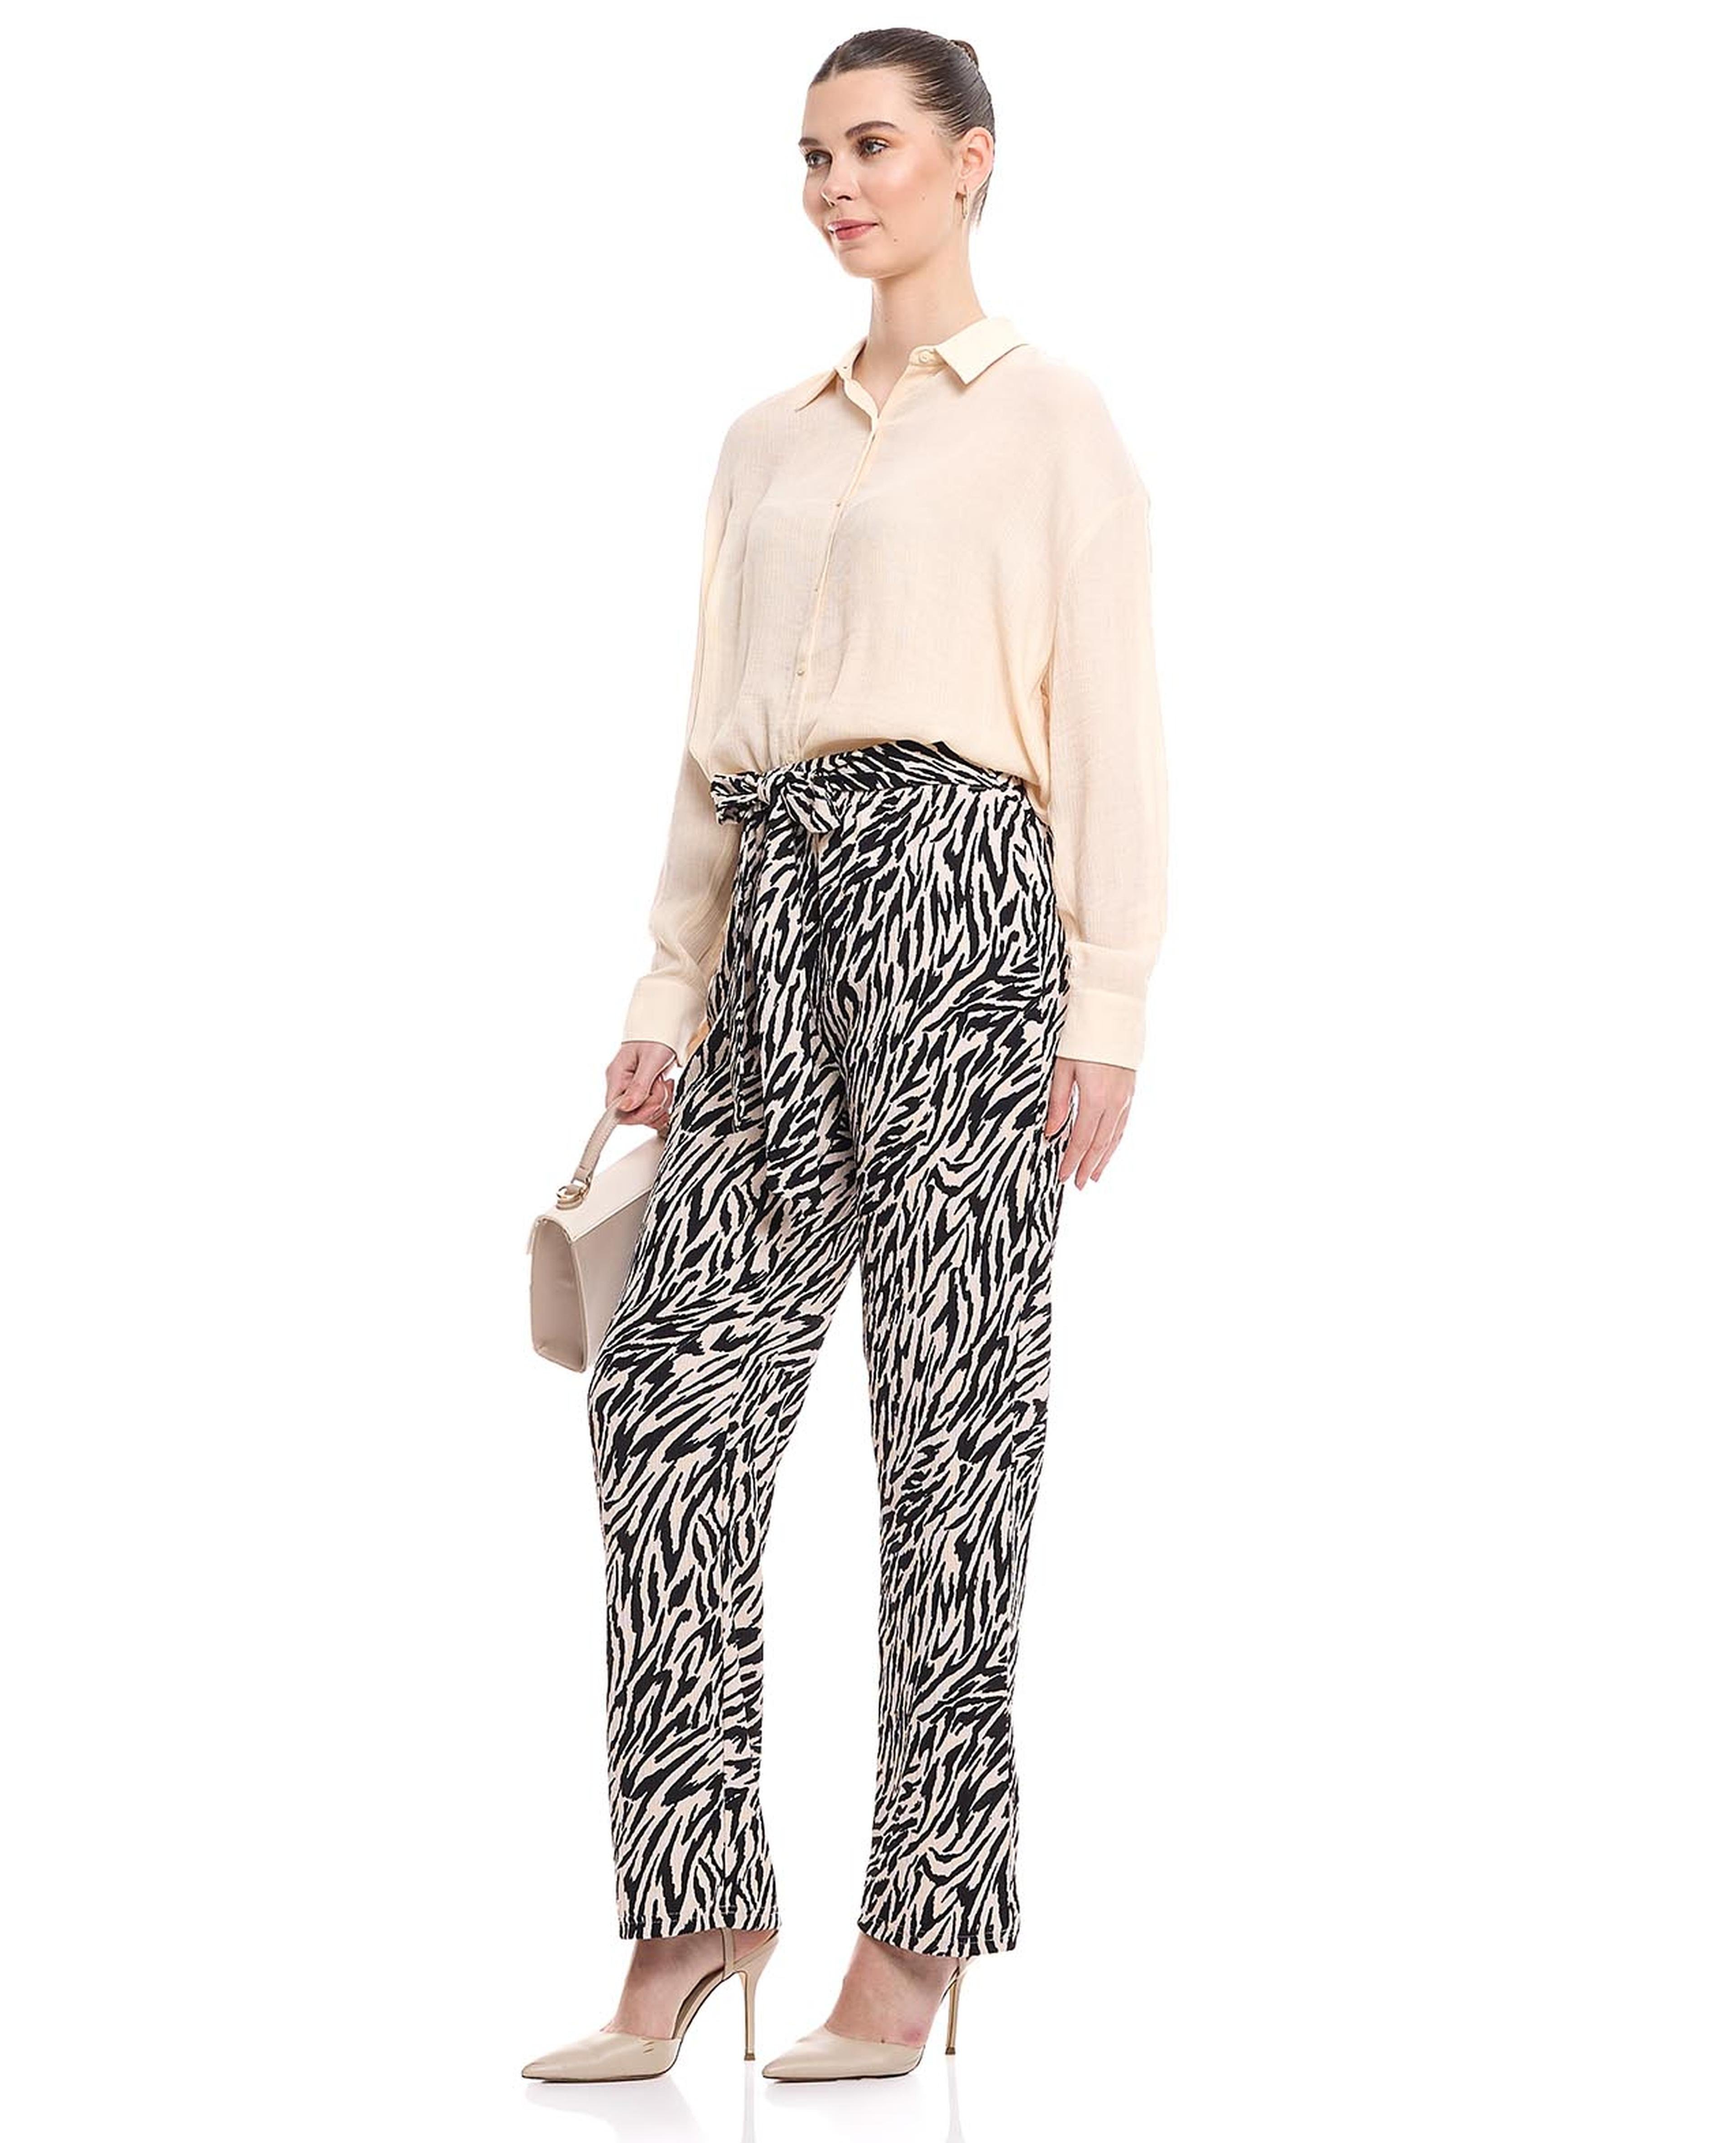 Zebra Patterned Straight Fit Trousers with Elastic Waist